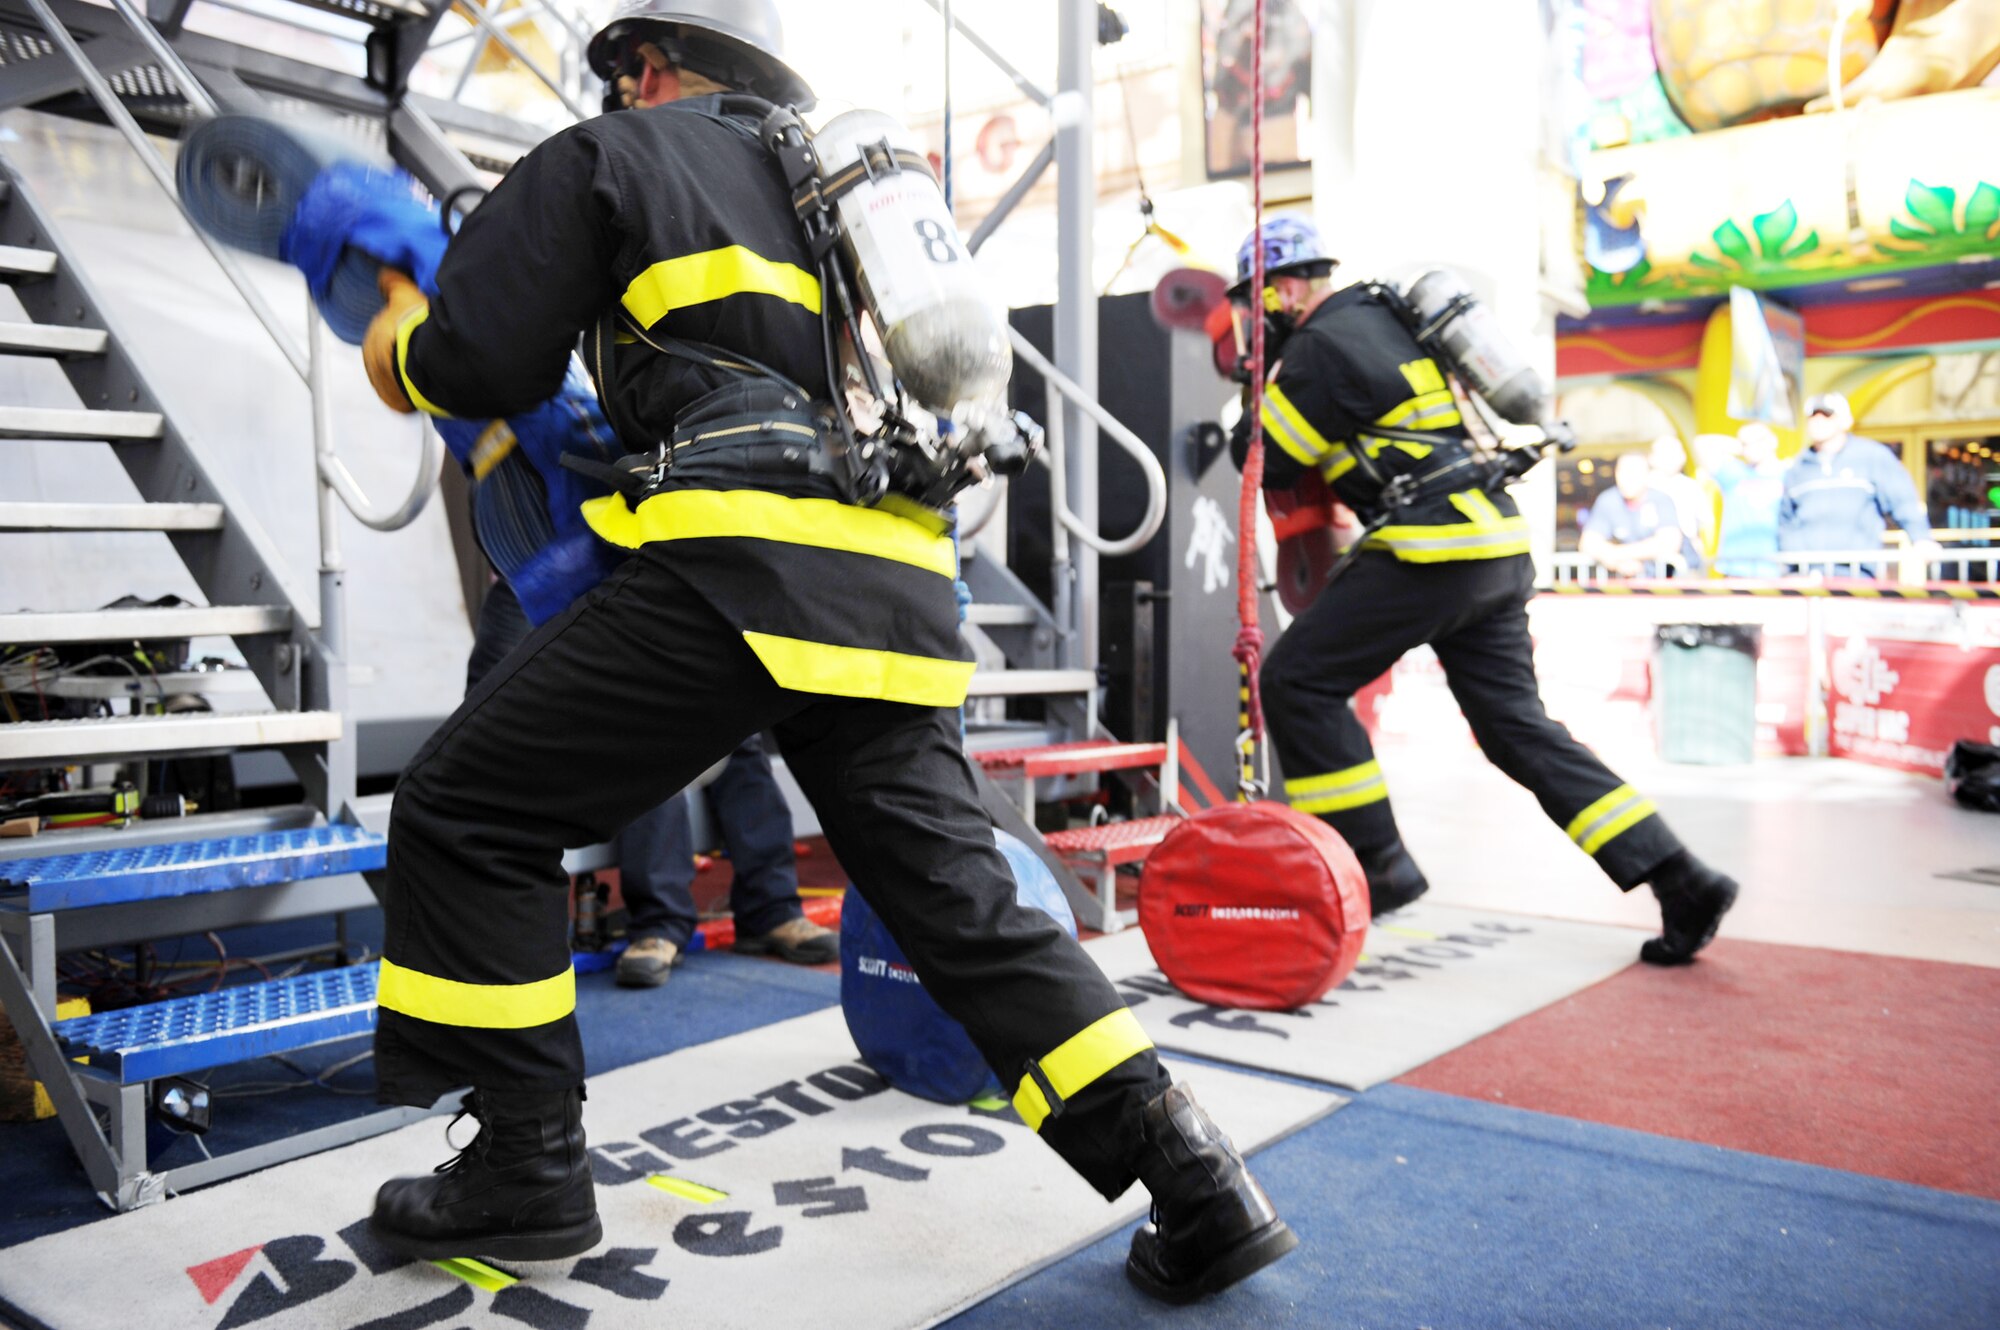 Firefighters from all around the world compete in an individual firefighter event Nov. 17, 2009, at the 2009 Scott Firefighter Combat Challenge in Las Vegas. (U.S. Air Force photo/Staff Sgt. Desiree N. Palacios)
